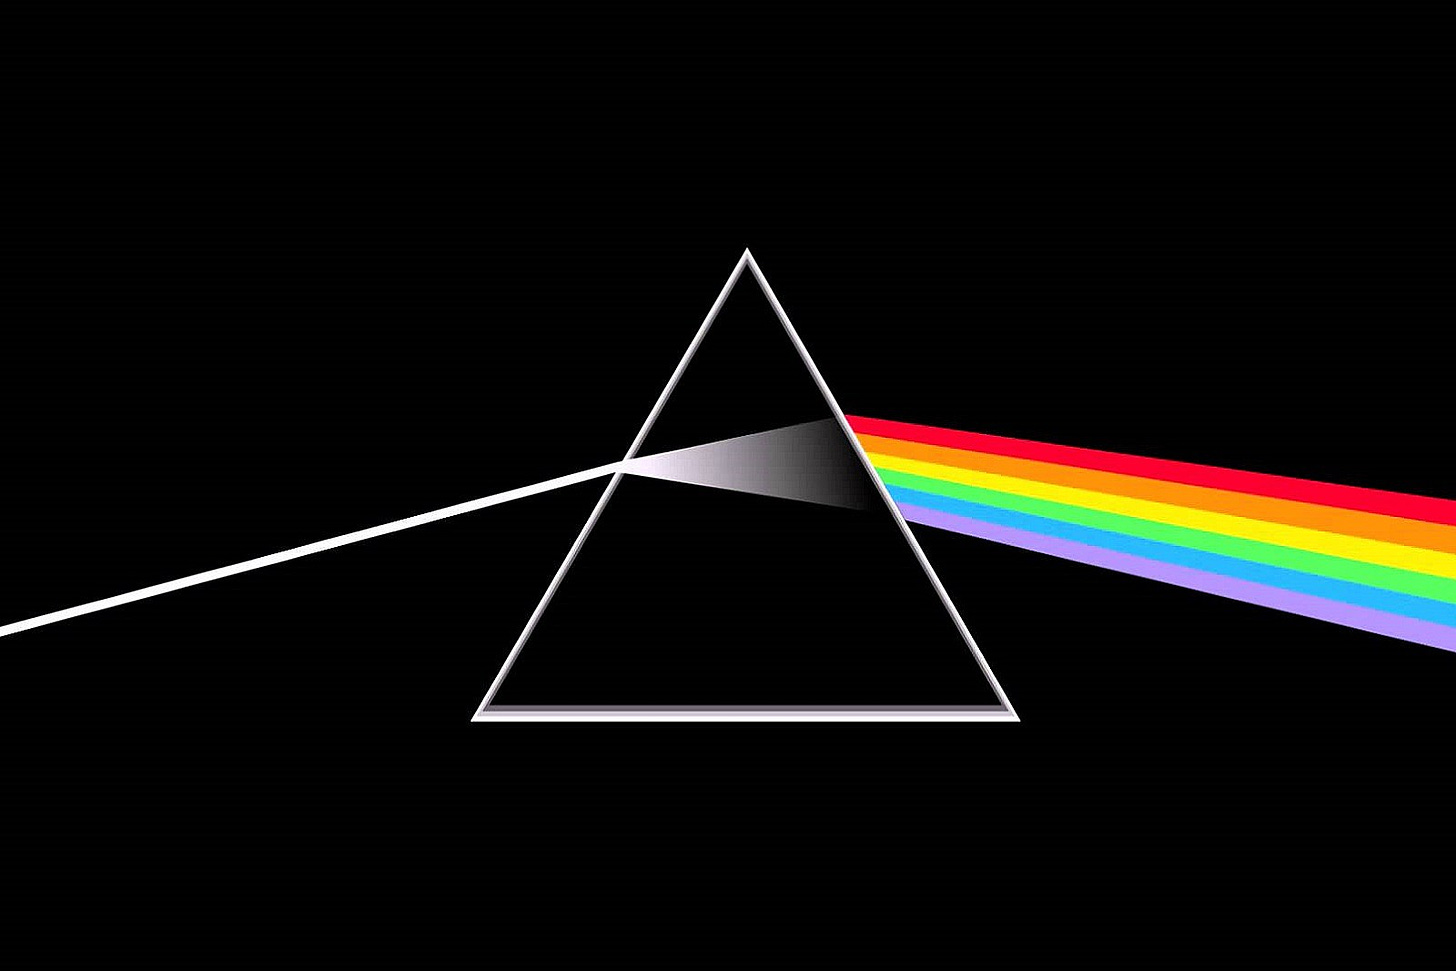 Pink Floyd's The Dark Side of the Moon